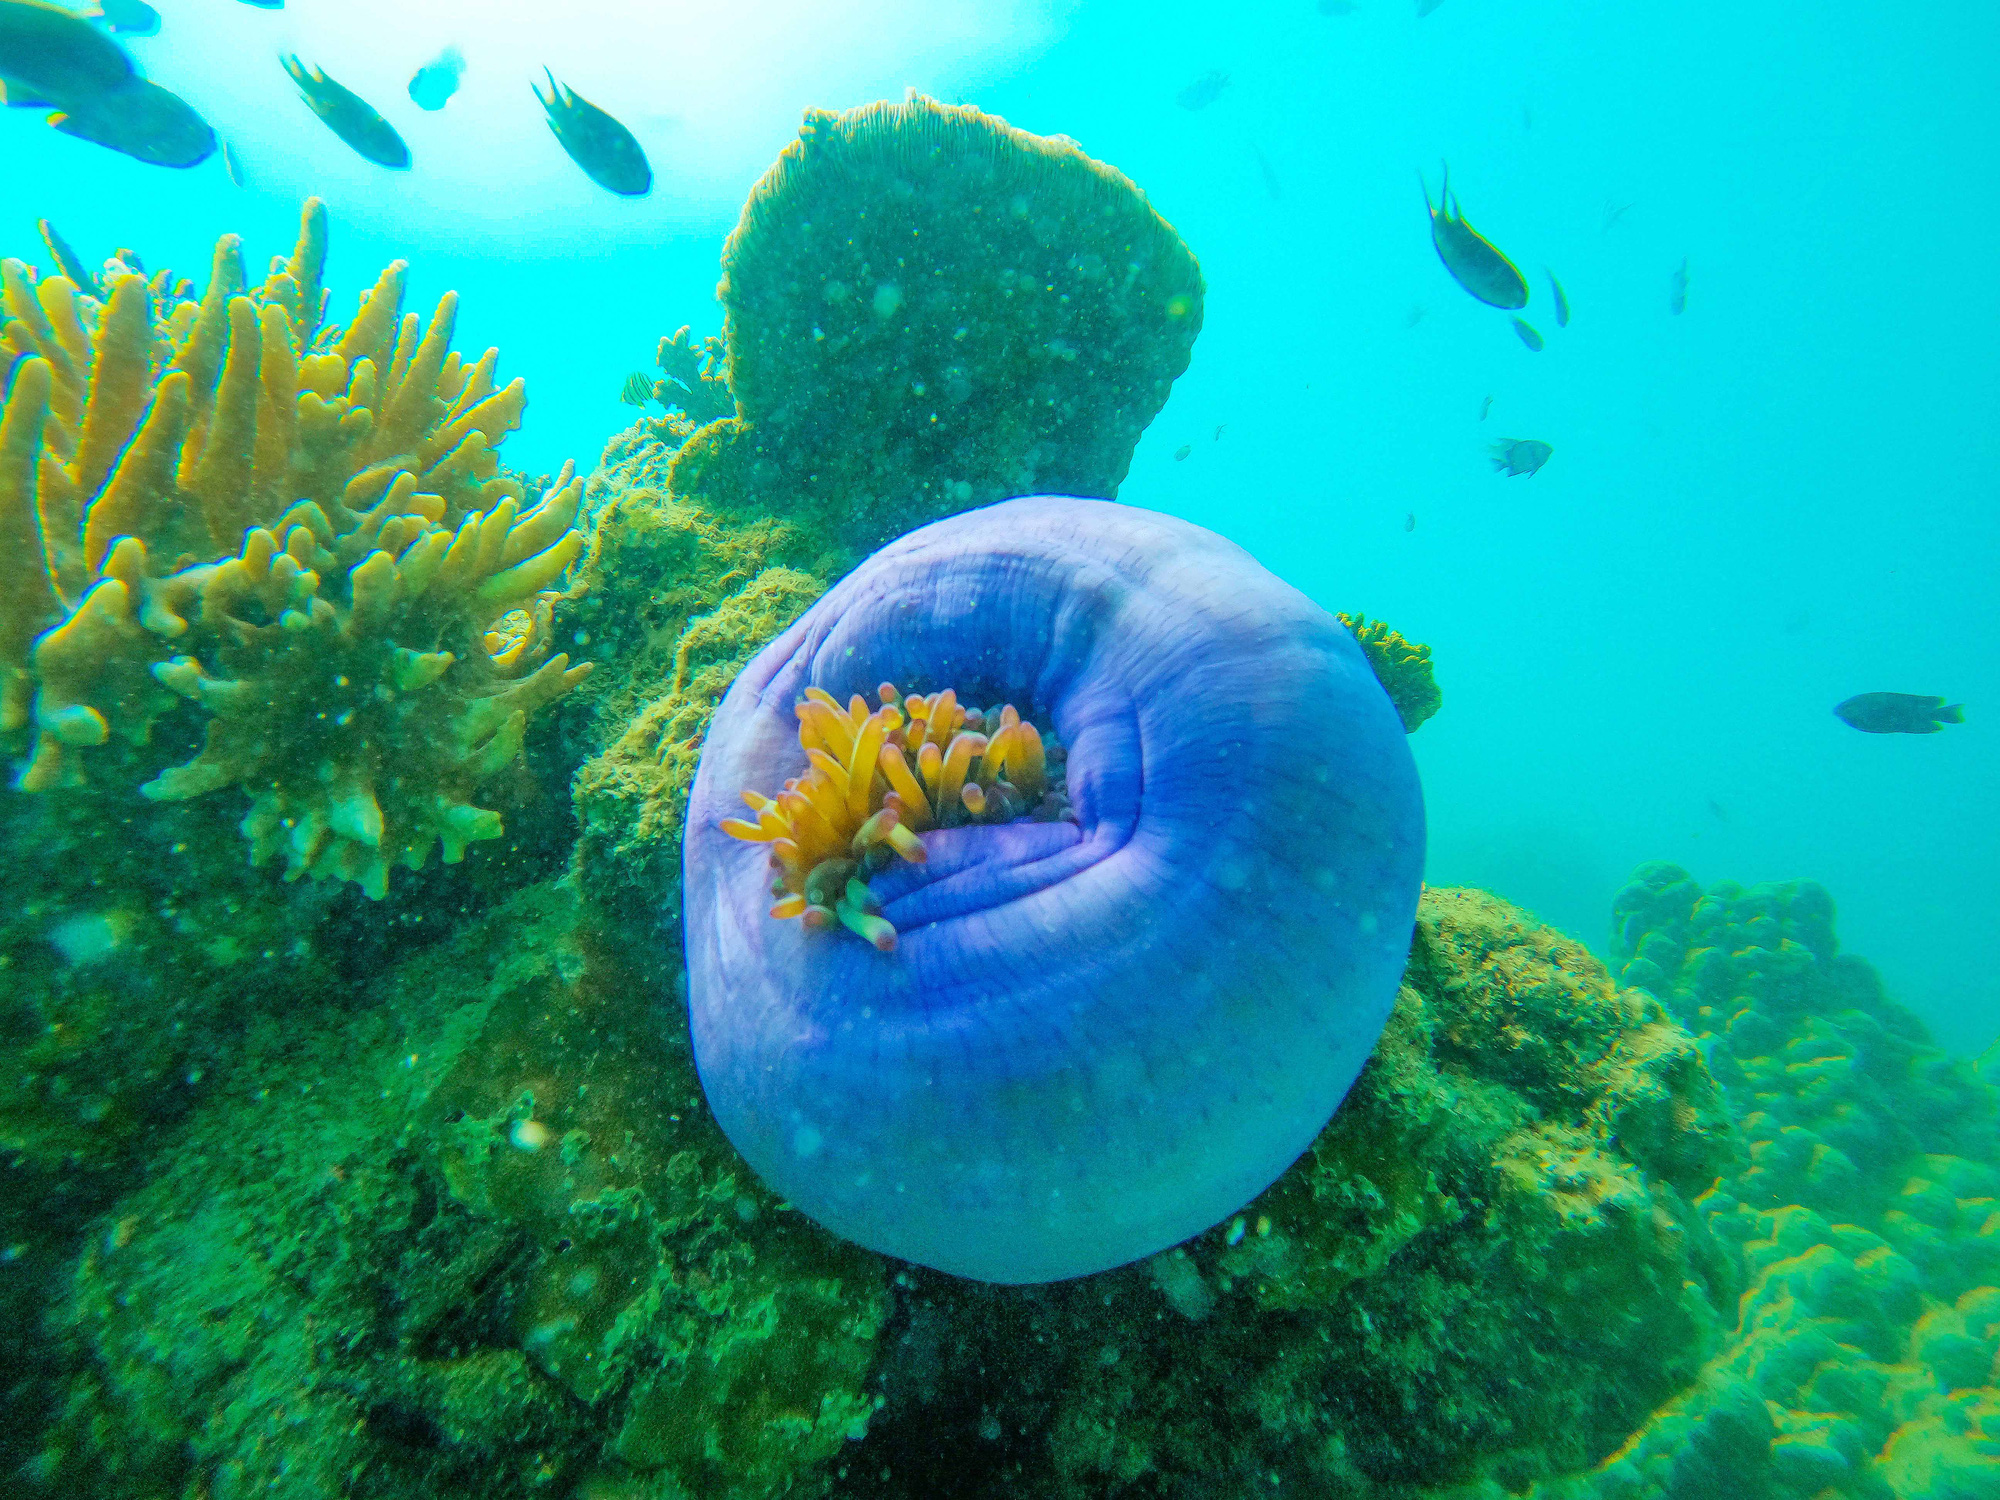 A sea anemone lives on a coral reef in the waters of May Rut Trong islet, Phu Quoc City, Kien Giang Province, southern Vietnam. Photo: Hoang Giam / Tuoi Tre